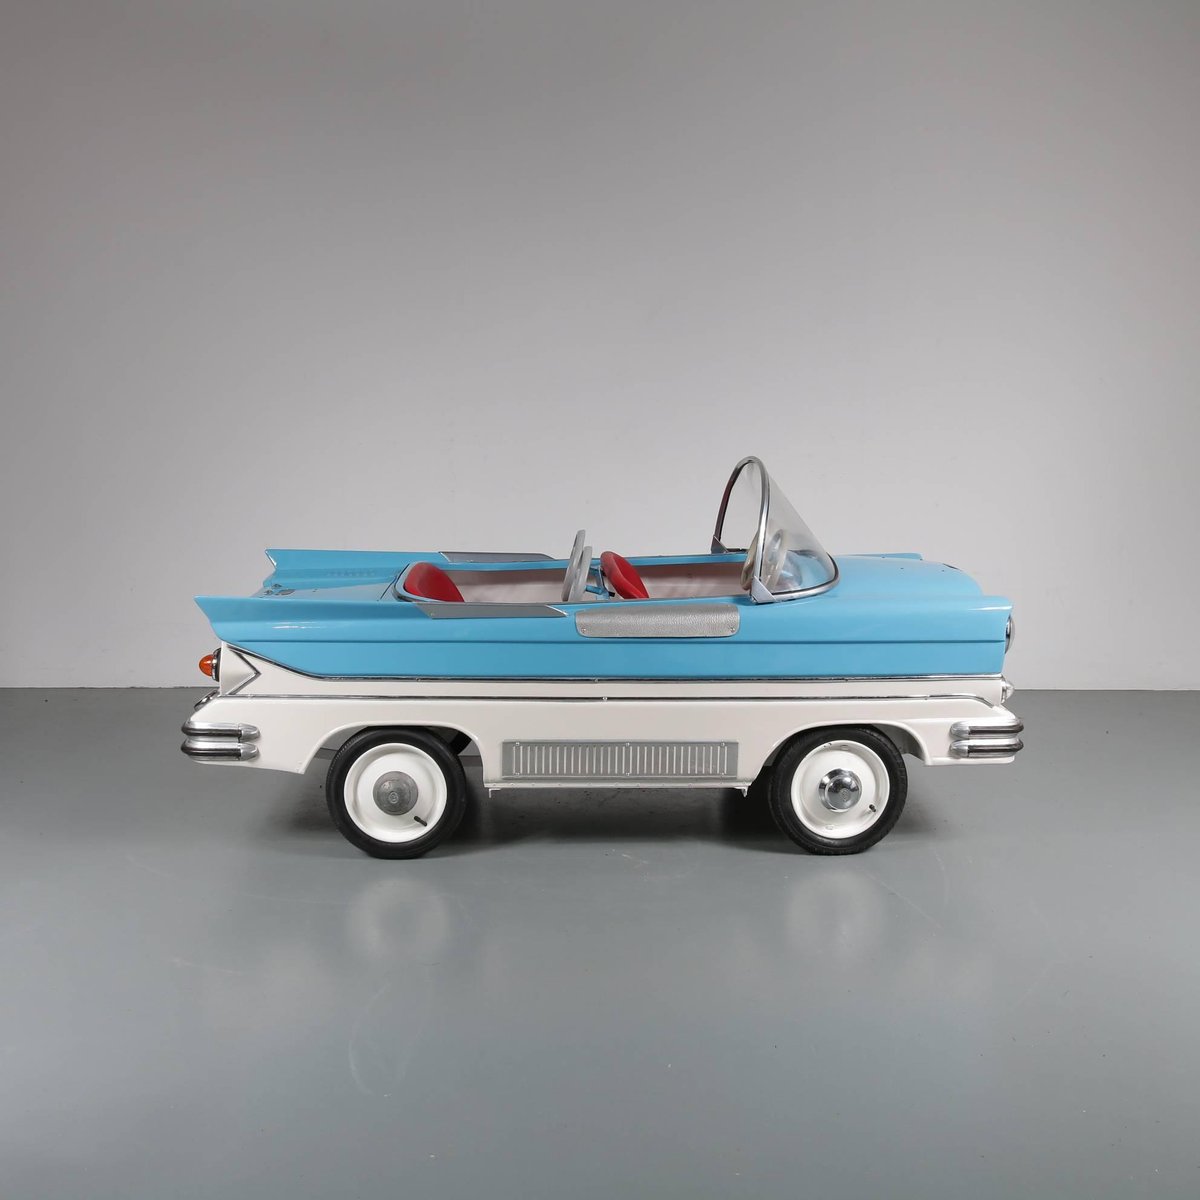 carousel car by karel baeyens for l autopede dodge 1960s GG-450036